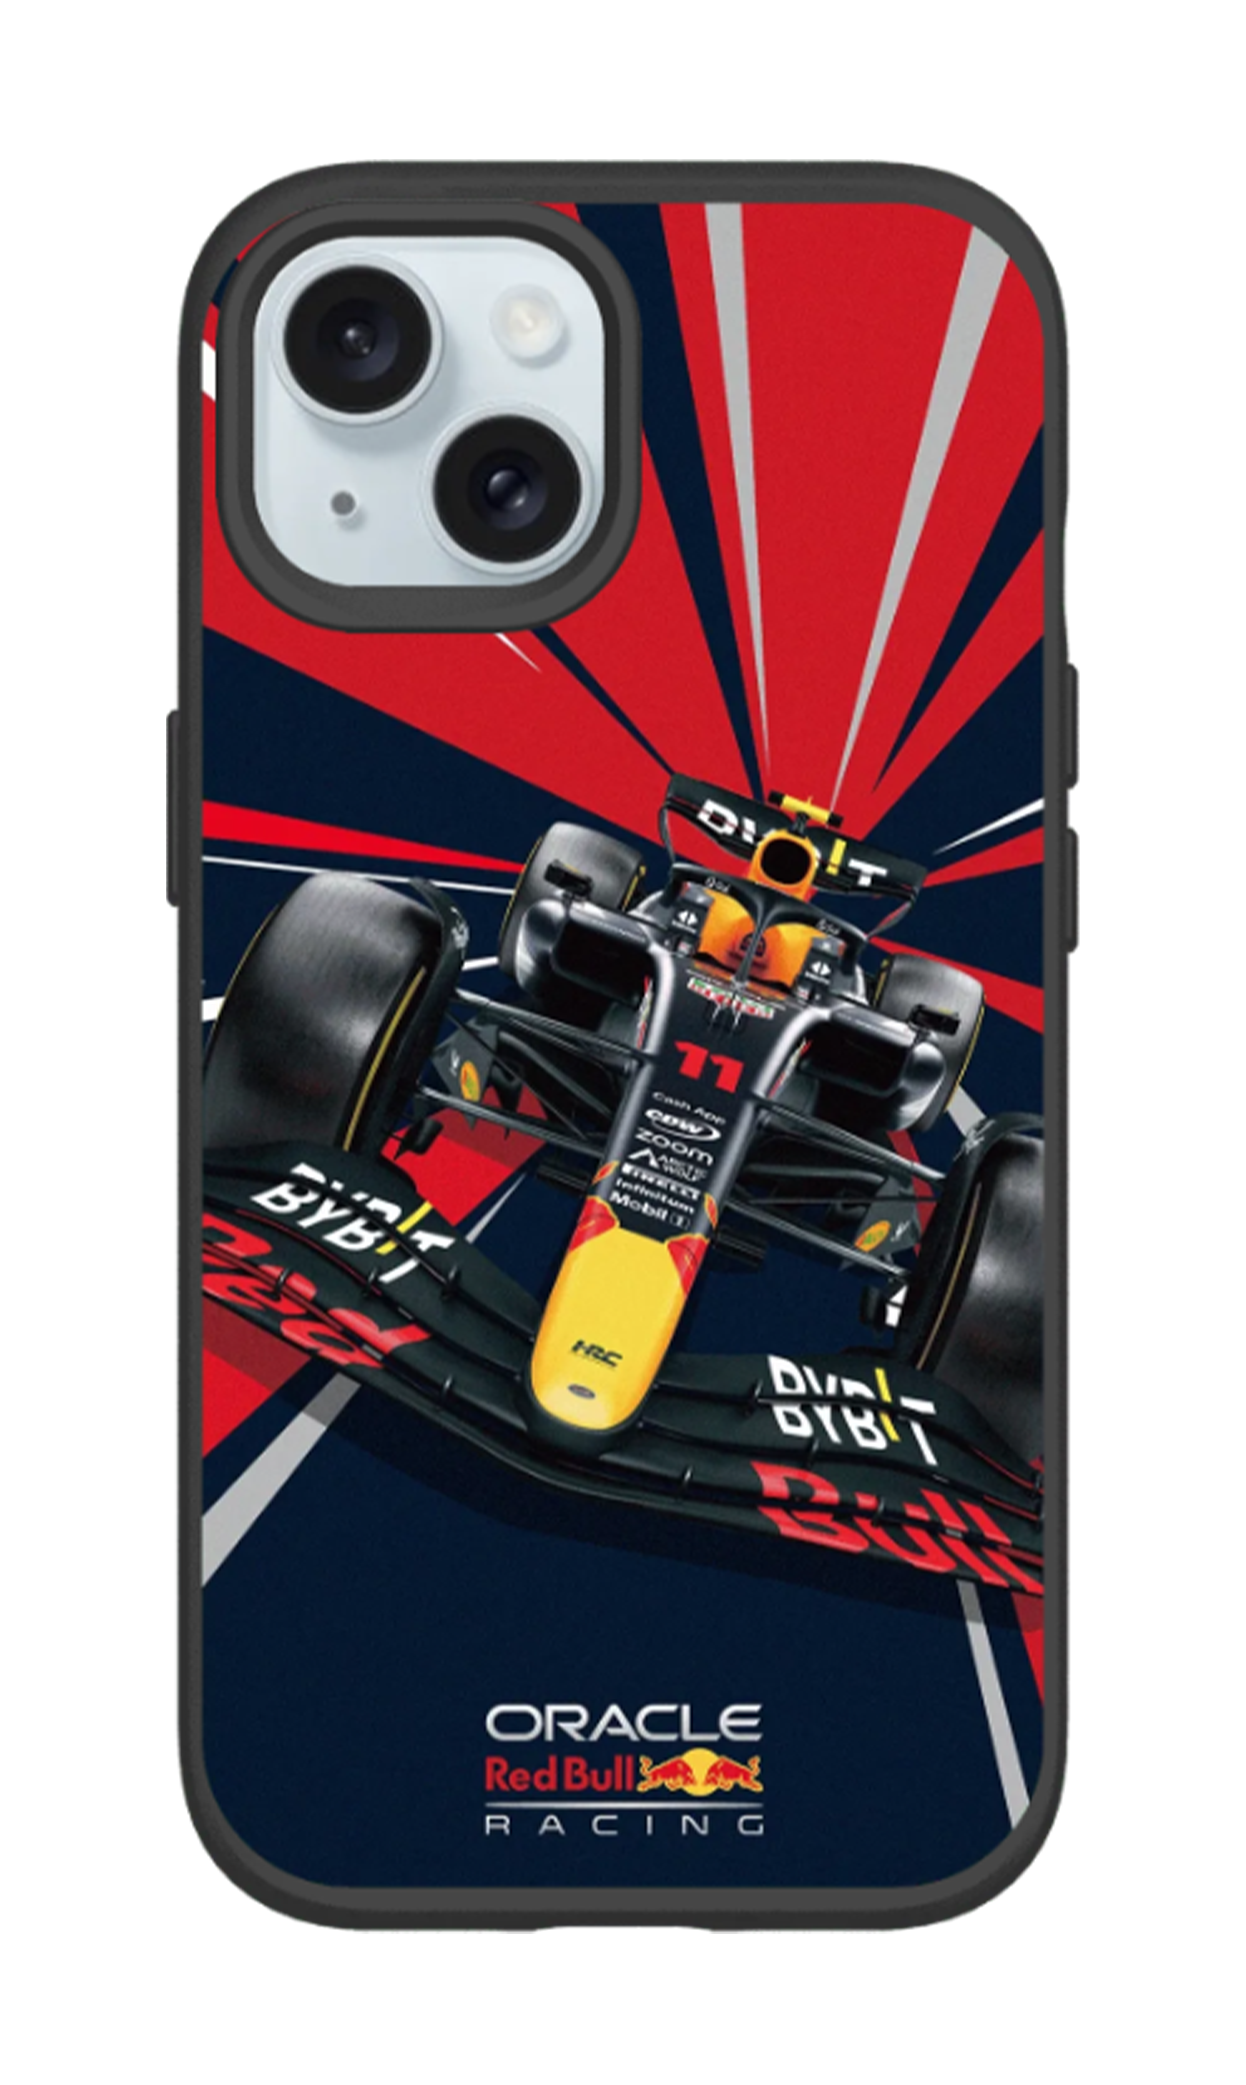 SolidSuit Black X Oracle Red Bull Racing - F1 Car Ready, set, go! 